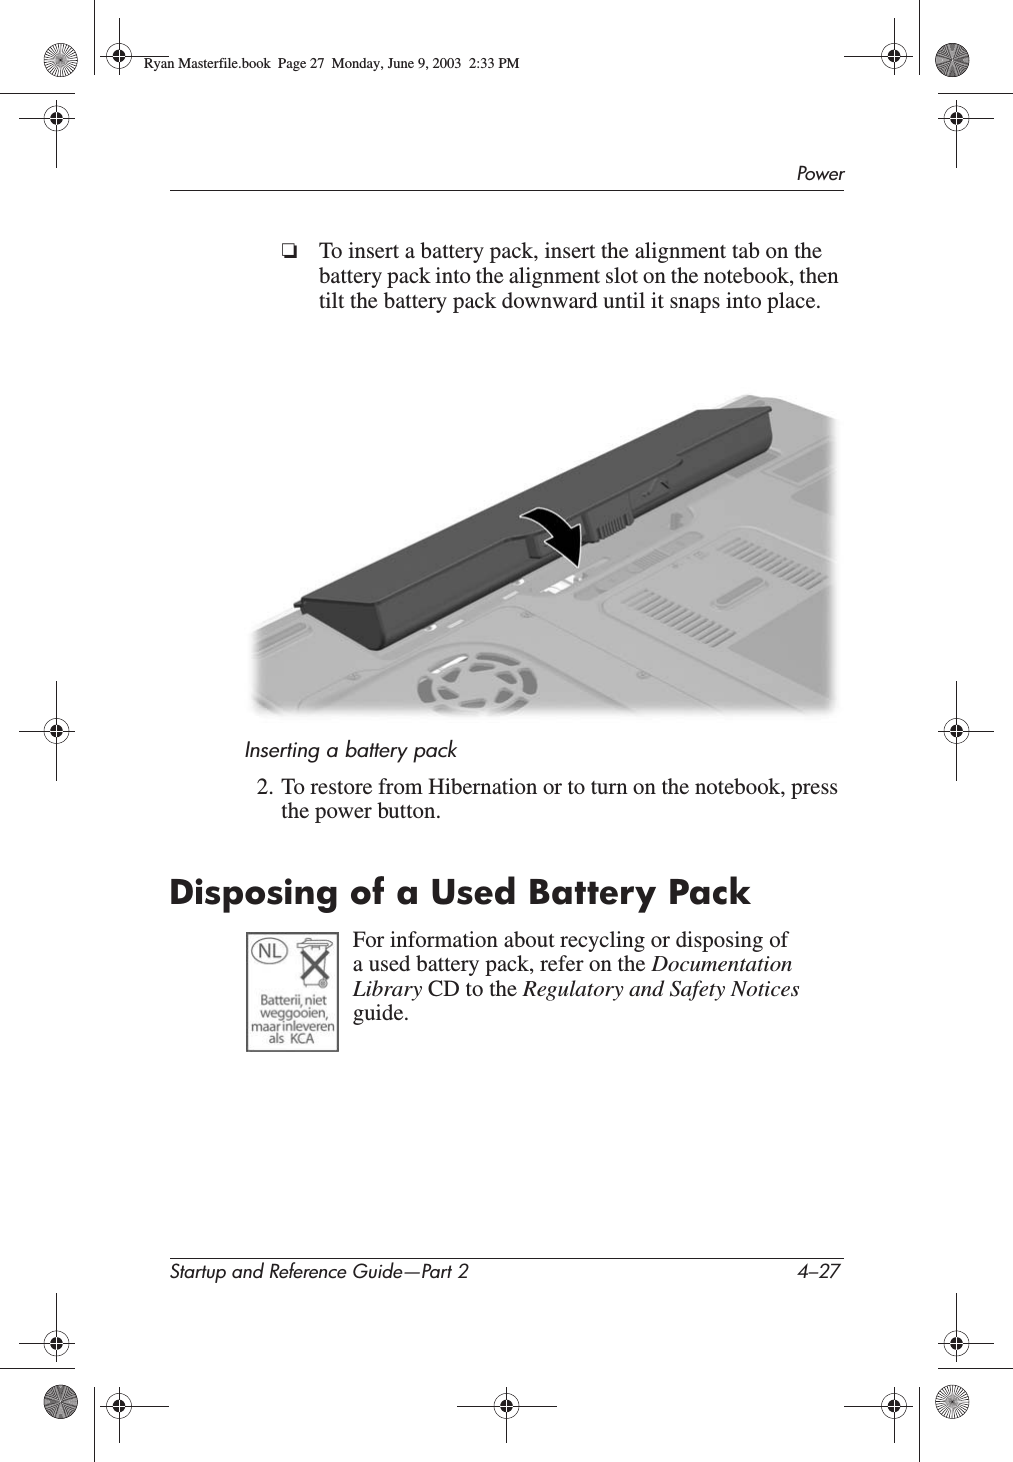 PowerStartup and Reference Guide—Part 2 4–27❏To insert a battery pack, insert the alignment tab on the battery pack into the alignment slot on the notebook, then tilt the battery pack downward until it snaps into place.Inserting a battery pack2. To restore from Hibernation or to turn on the notebook, press the power button.Disposing of a Used Battery PackFor information about recycling or disposing of a used battery pack, refer on the DocumentationLibrary CD to the Regulatory and Safety Notices guide.Ryan Masterfile.book  Page 27  Monday, June 9, 2003  2:33 PM